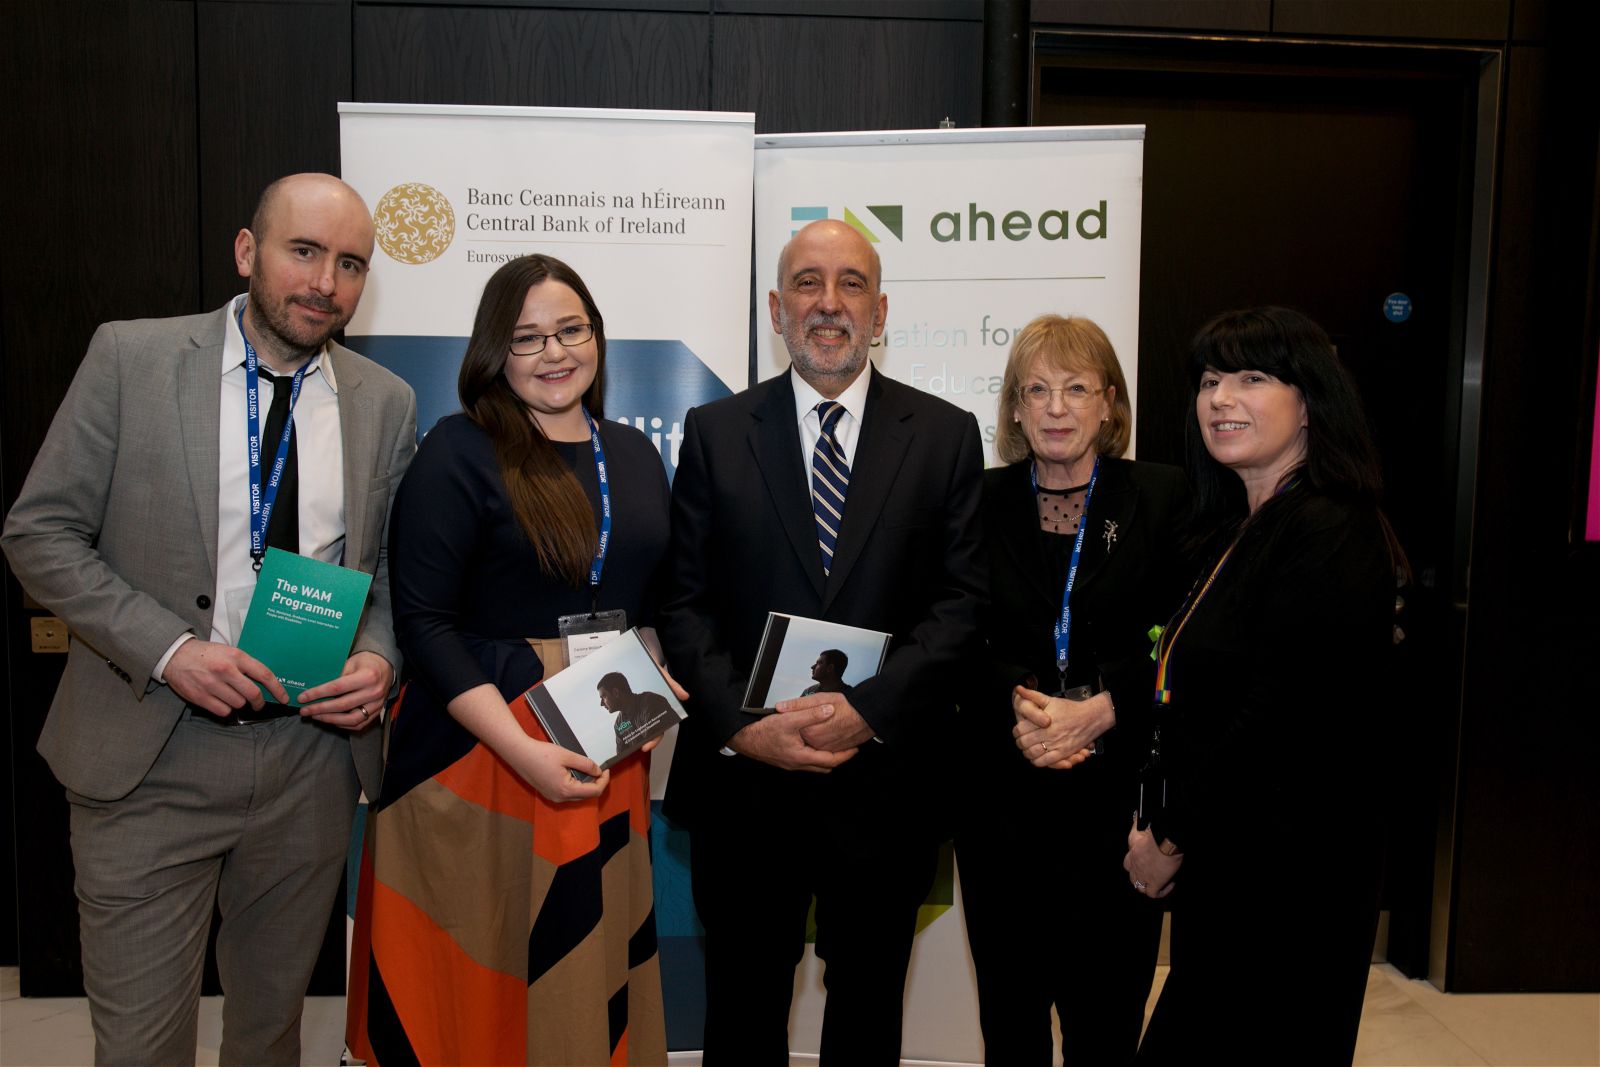 Dara Ryder CEO of AHEAD, Caroline McGrotty AHEAD WAM Coordinator, Gabriel Makhlouf - Govenor of Central Bank of Ireland, Ann Heelan outgoing CEO of AHEAD and Eimear Reilly Head of HR Business Partners and Resourcing Central Bank of Ireland